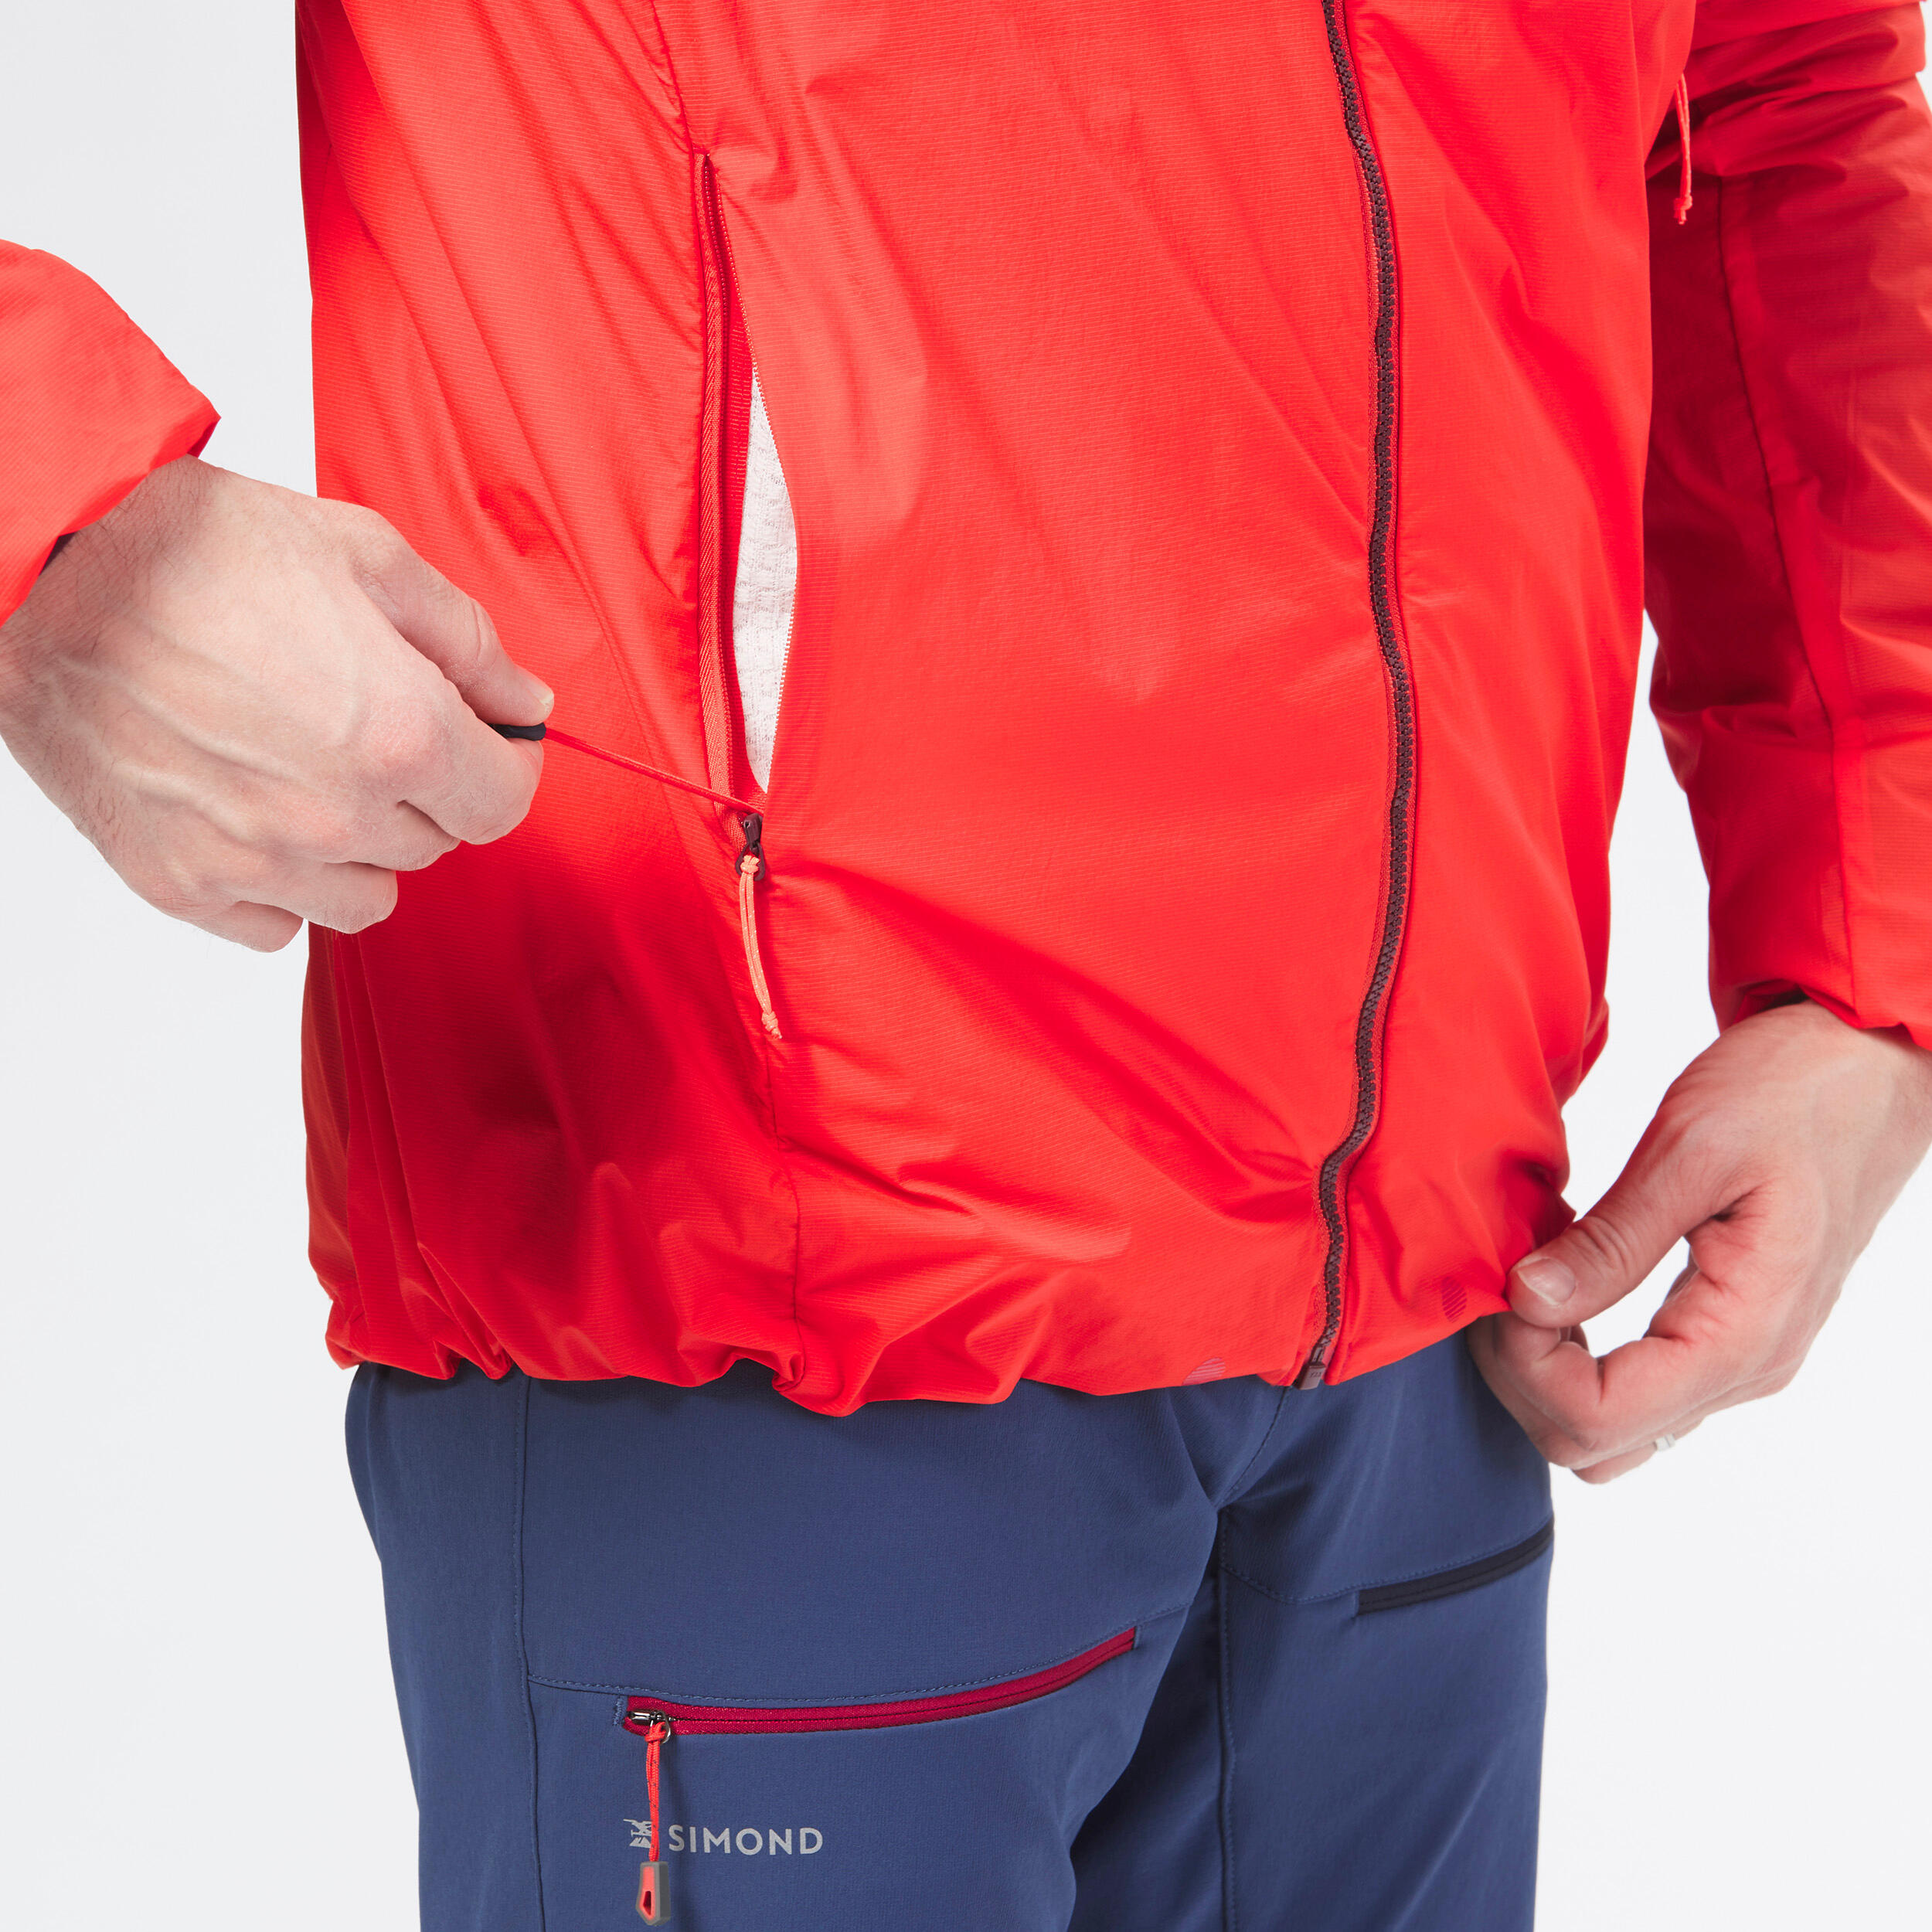 MEN'S WINDPROOF JACKET FOR MOUNTAINEERING - VERMILION RED 12/16